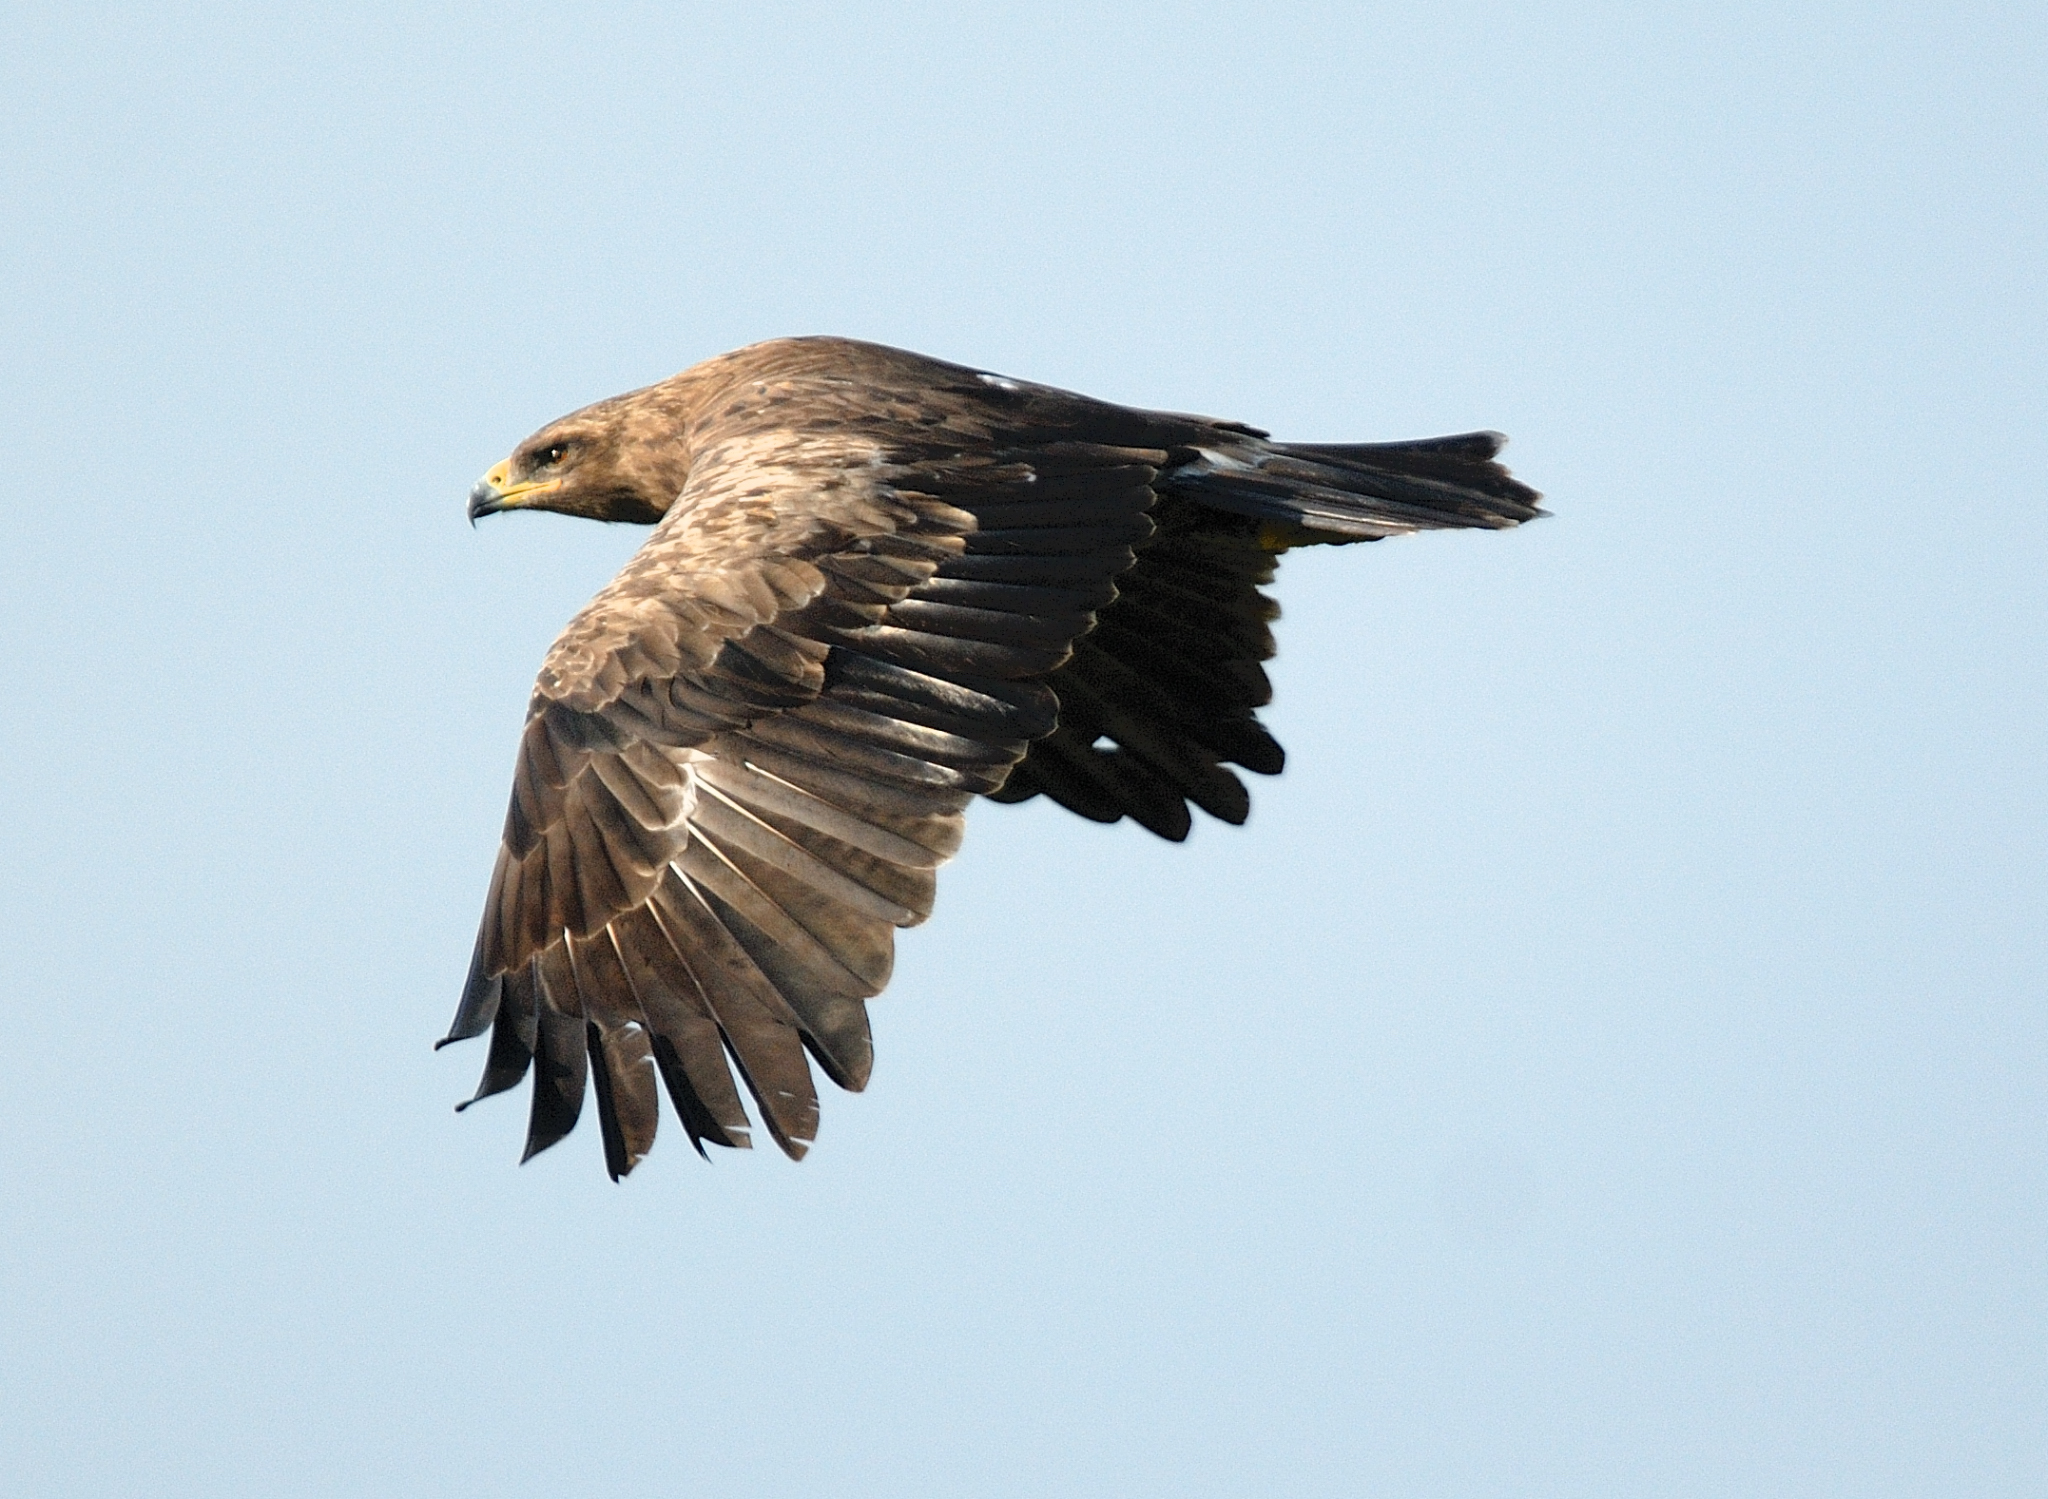 German conservationists plan campaign to save the lesser spotted eagle